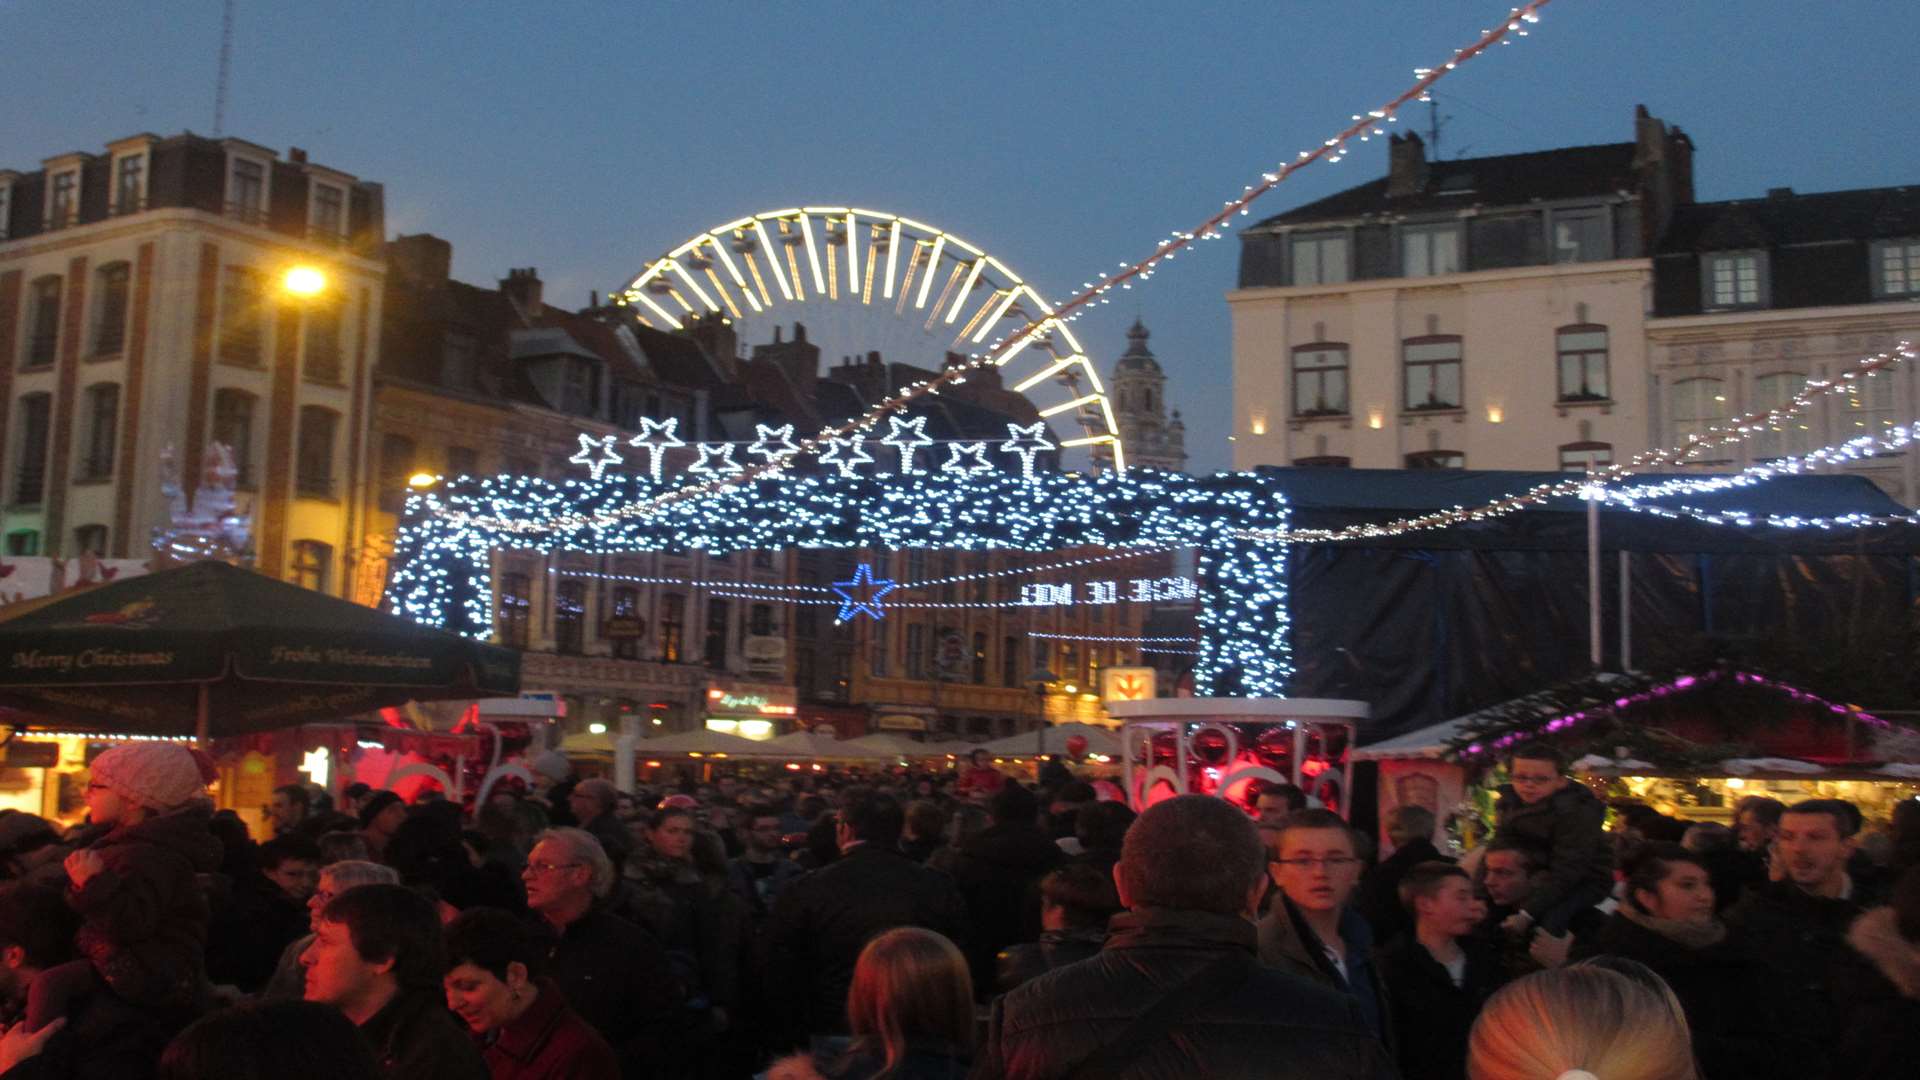 The traditional Christmas market in Lille has more than 50 stalls. Picture: Mike Rees